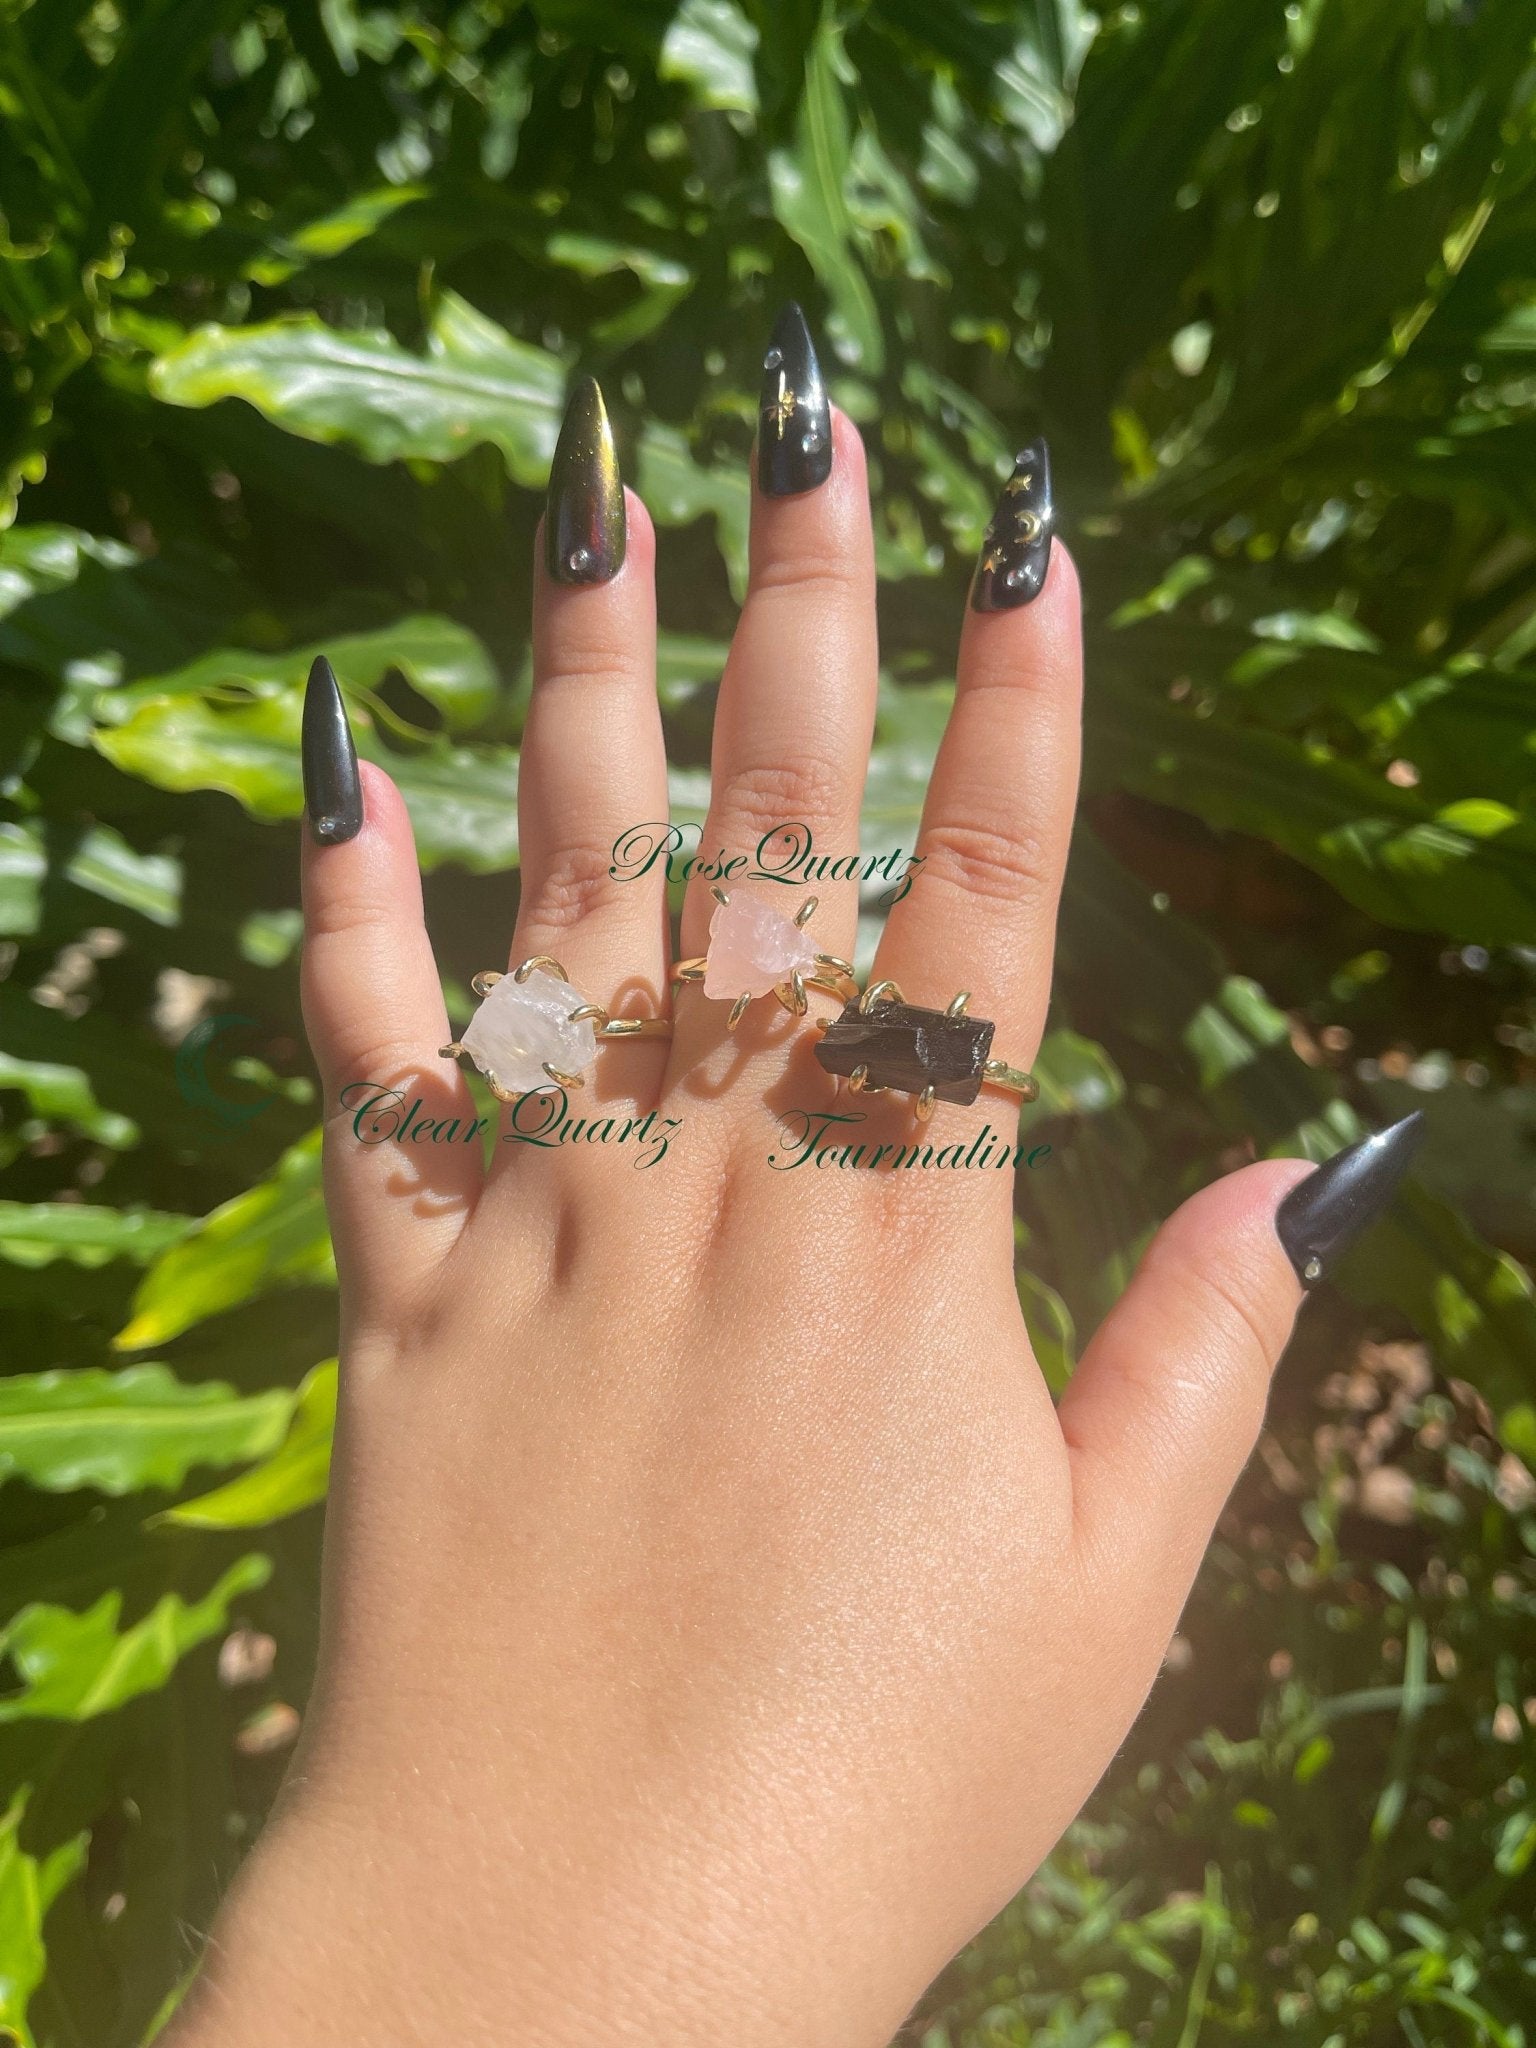 Raw Crystal Rings - Enchanted Forest Designs - product_type#